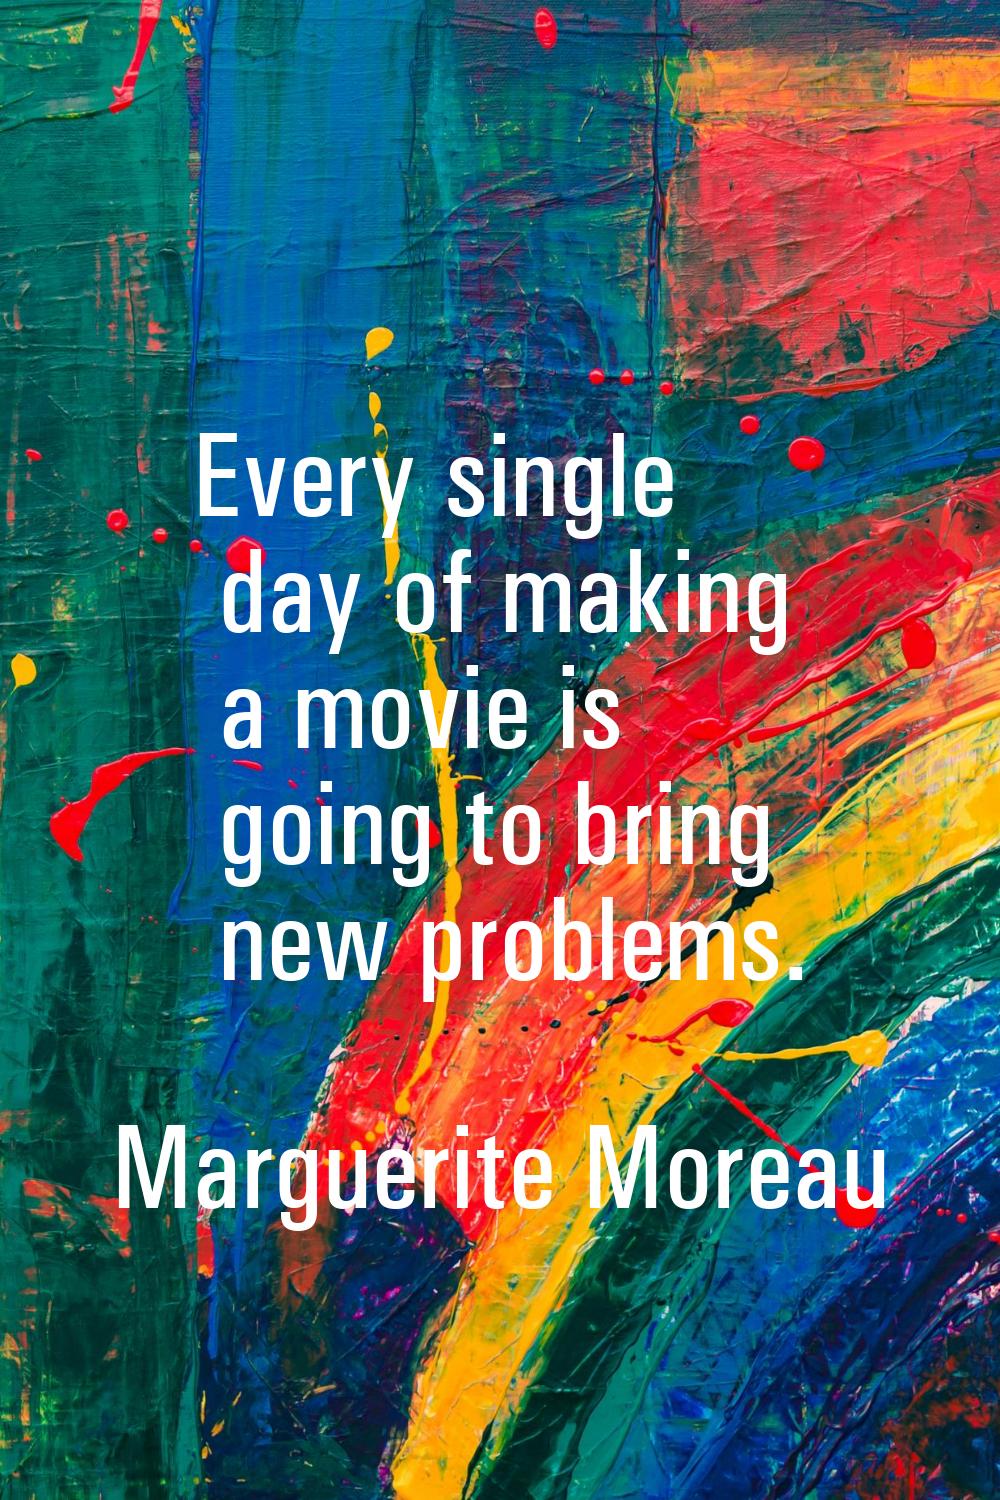 Every single day of making a movie is going to bring new problems.